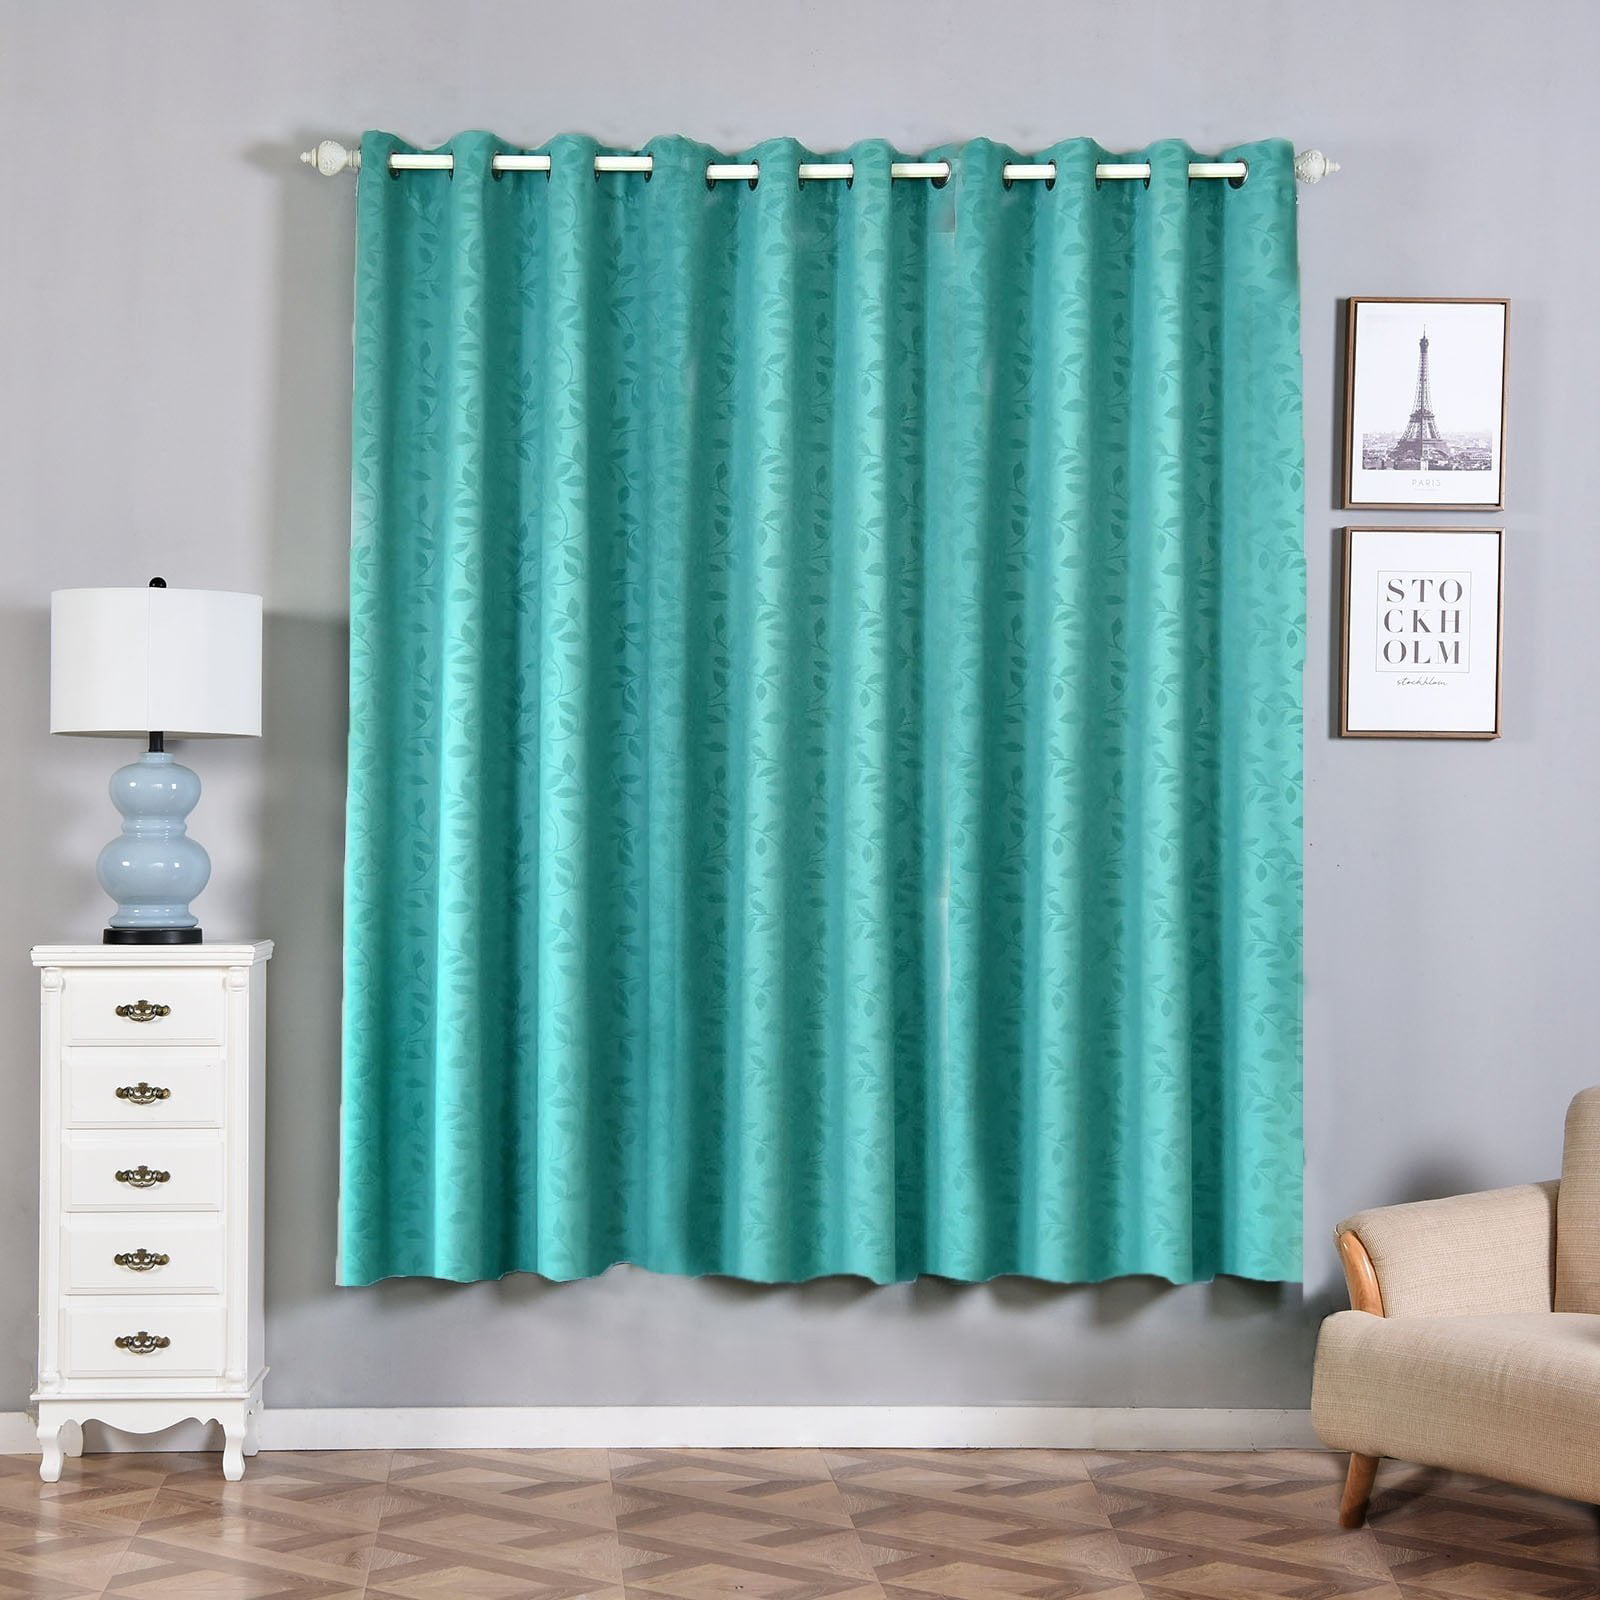 Teal Blackout Curtains | 2 Packs Embossed Curtains | 52 x 84 Inch